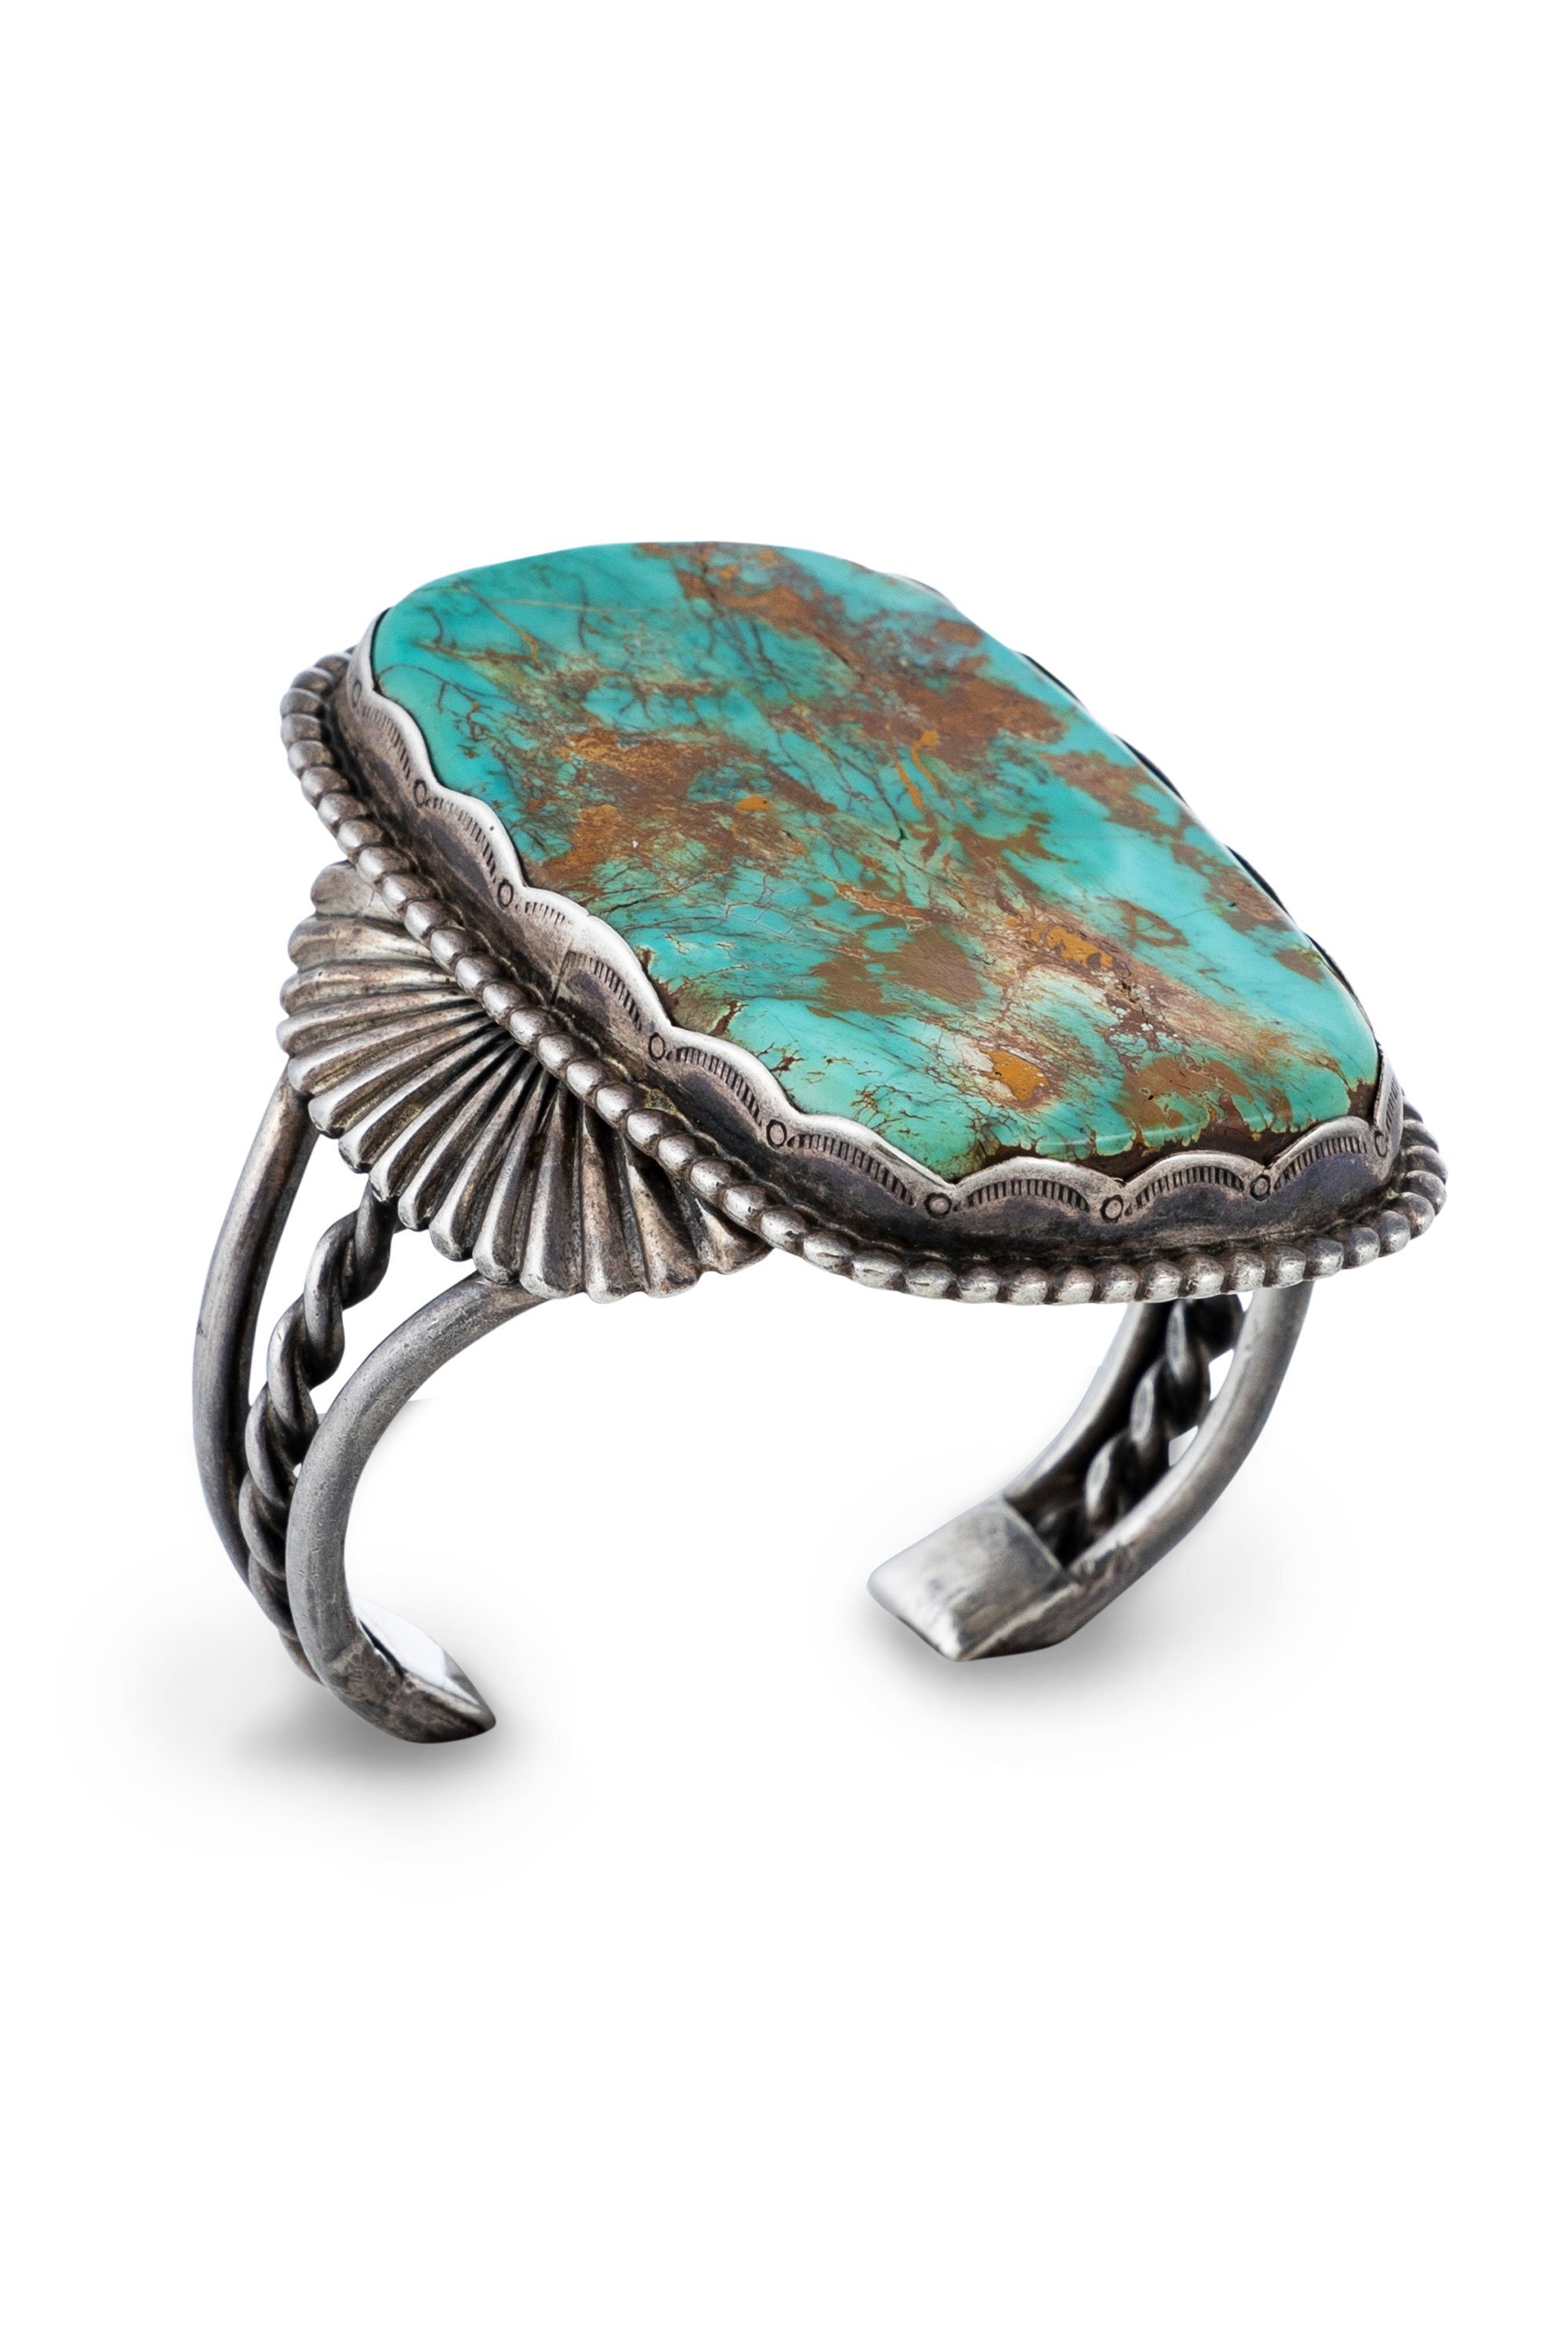 Cuff, Turquoise, Vintage, King Ranch Estate, 2677